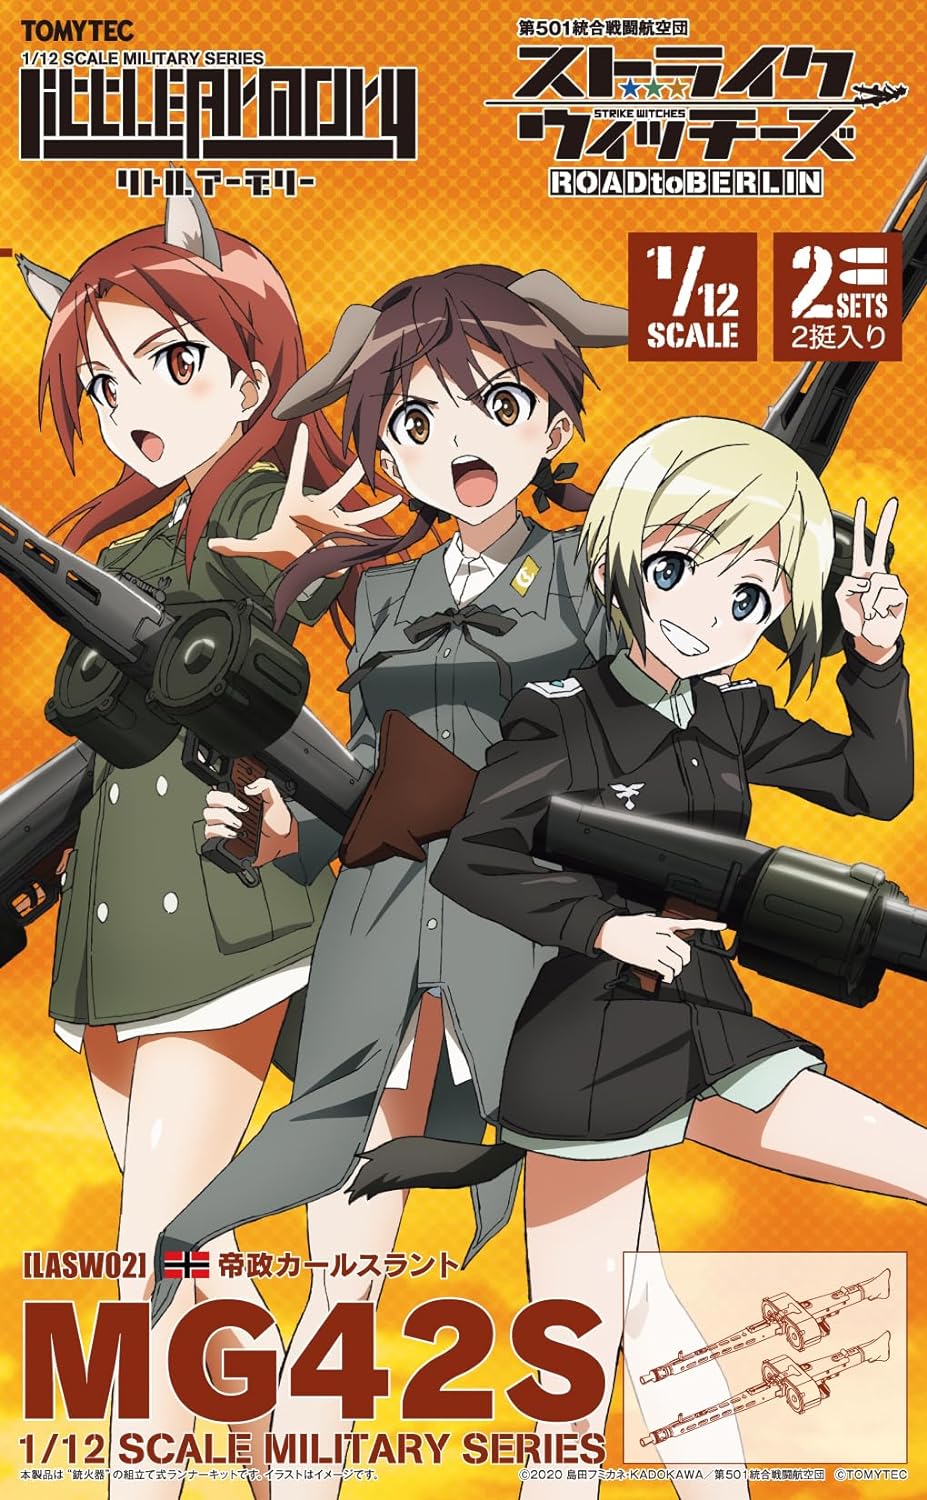 Tomytec Little Armory x Strike Witches LASW02 "Strike Witches ROAD to BERLIN" MG42S Set of 2 - BanzaiHobby